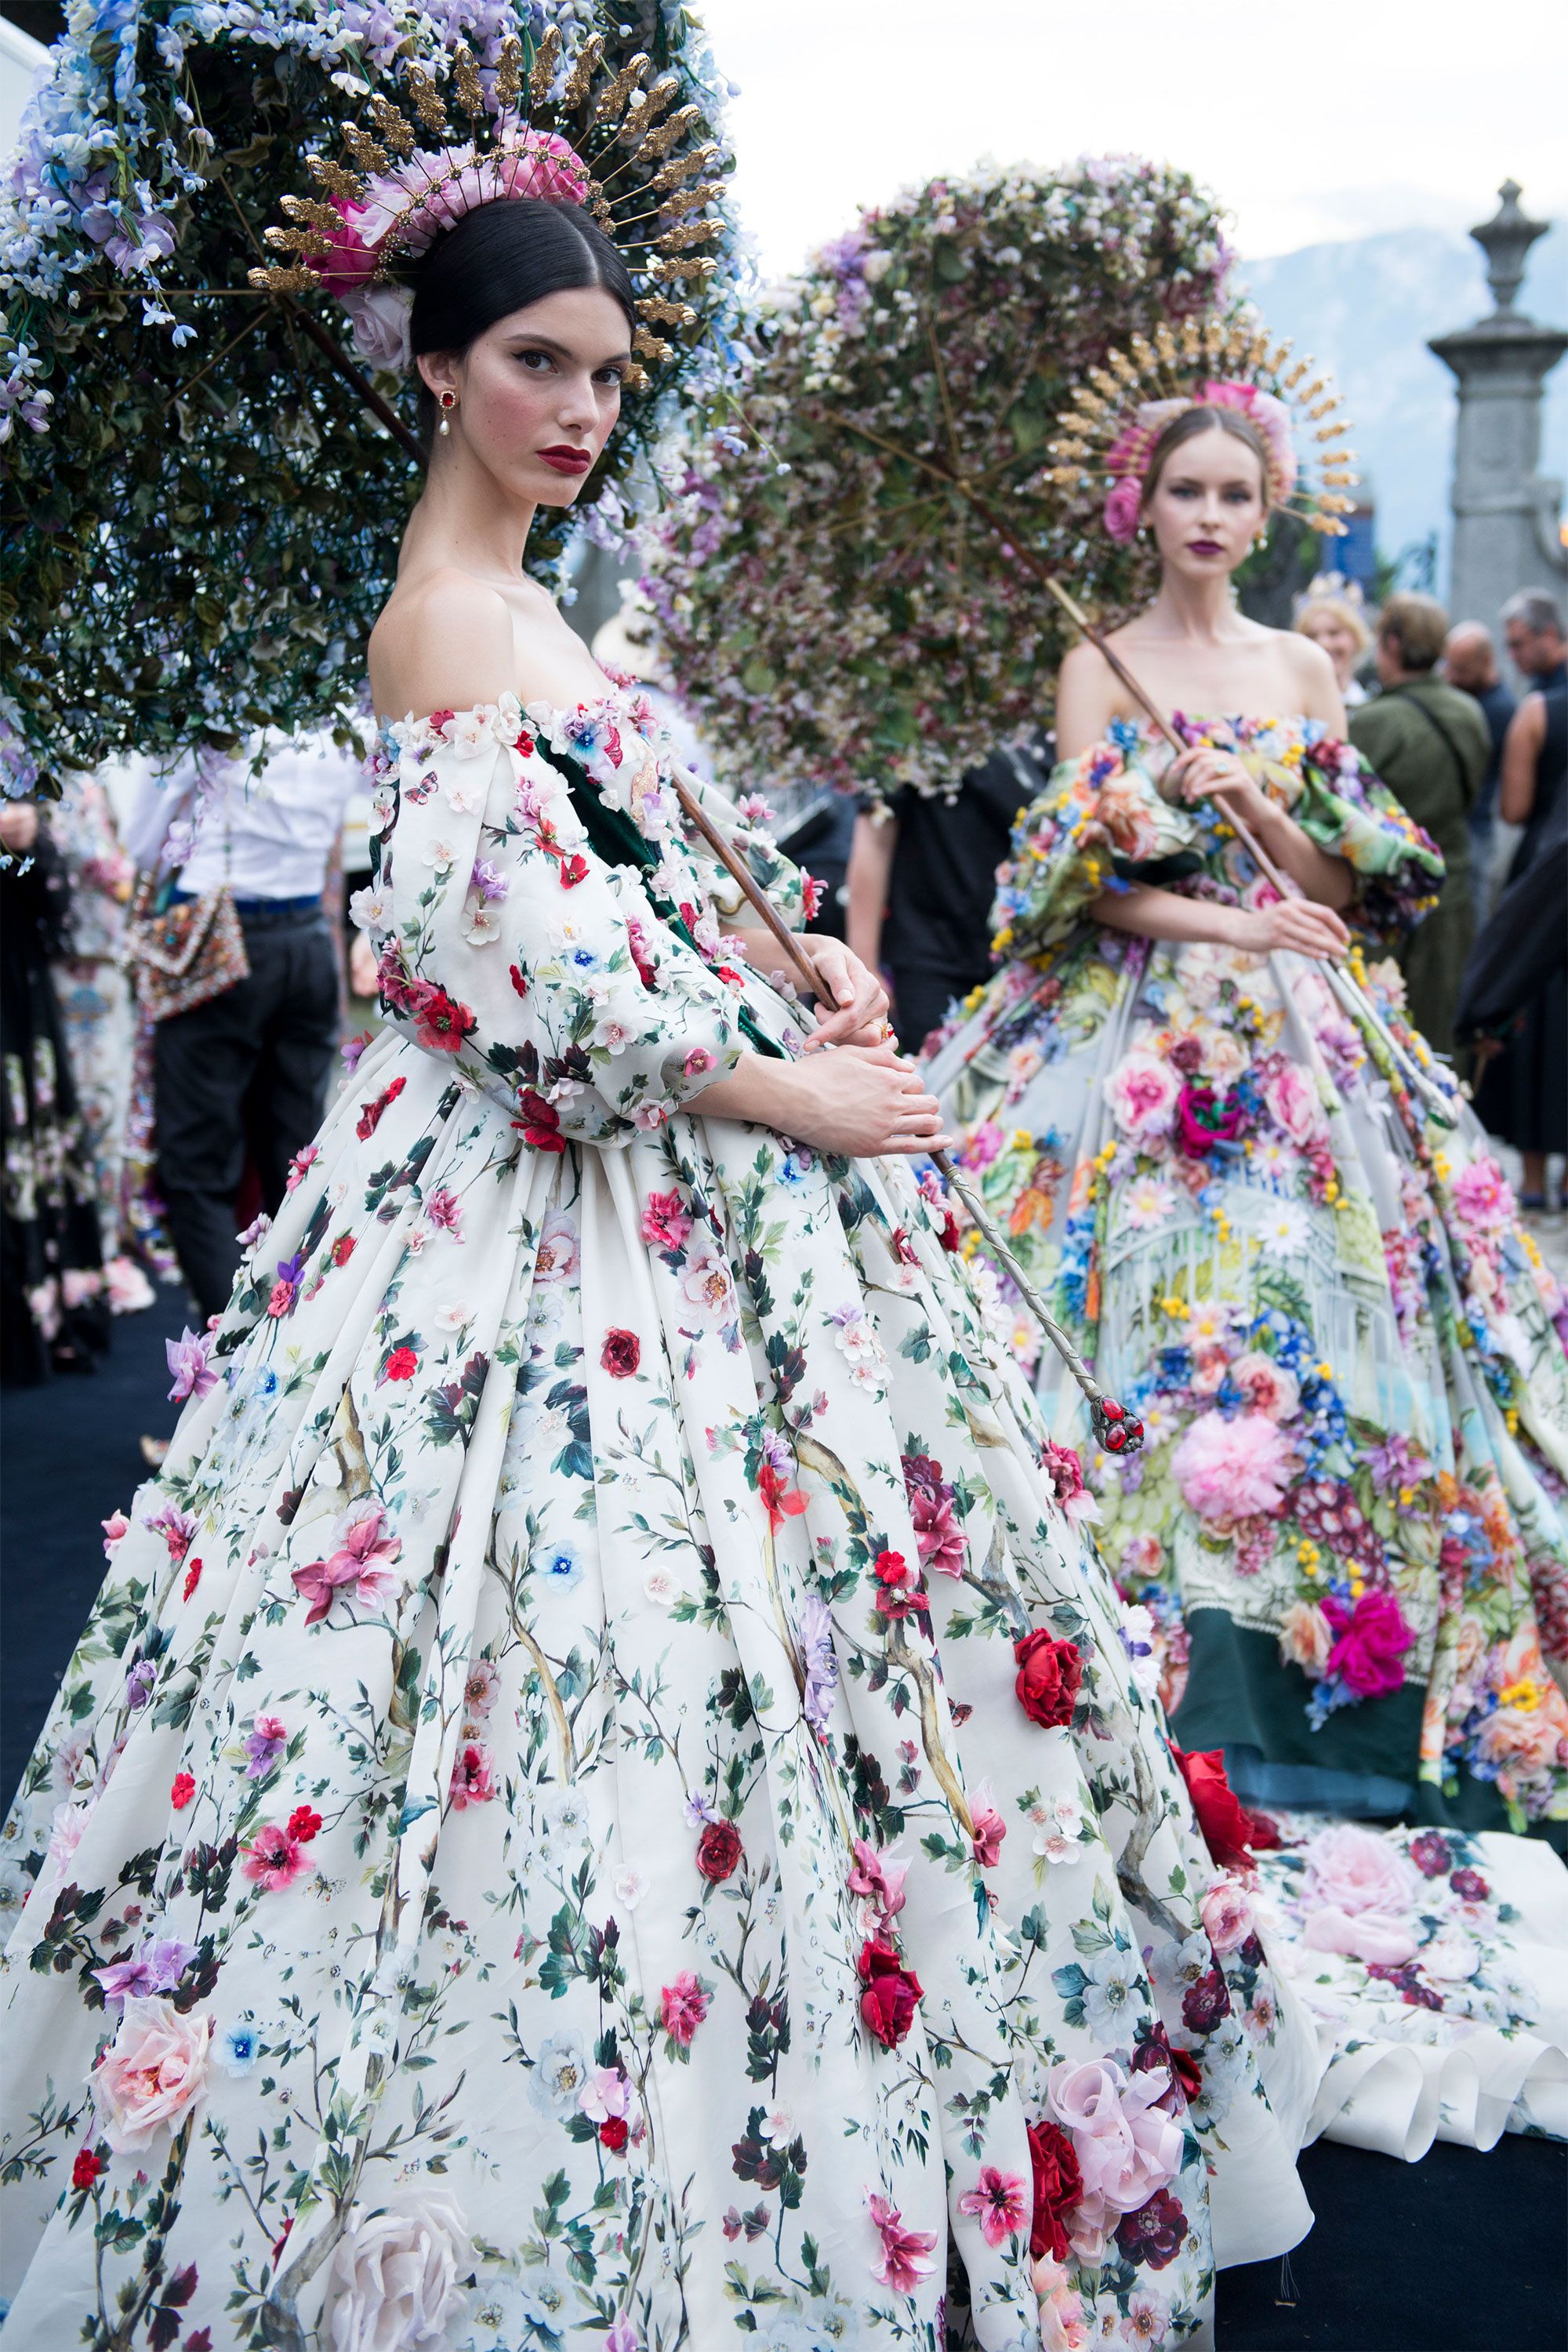 What it's really like to attend a Dolce & Gabbana couture show